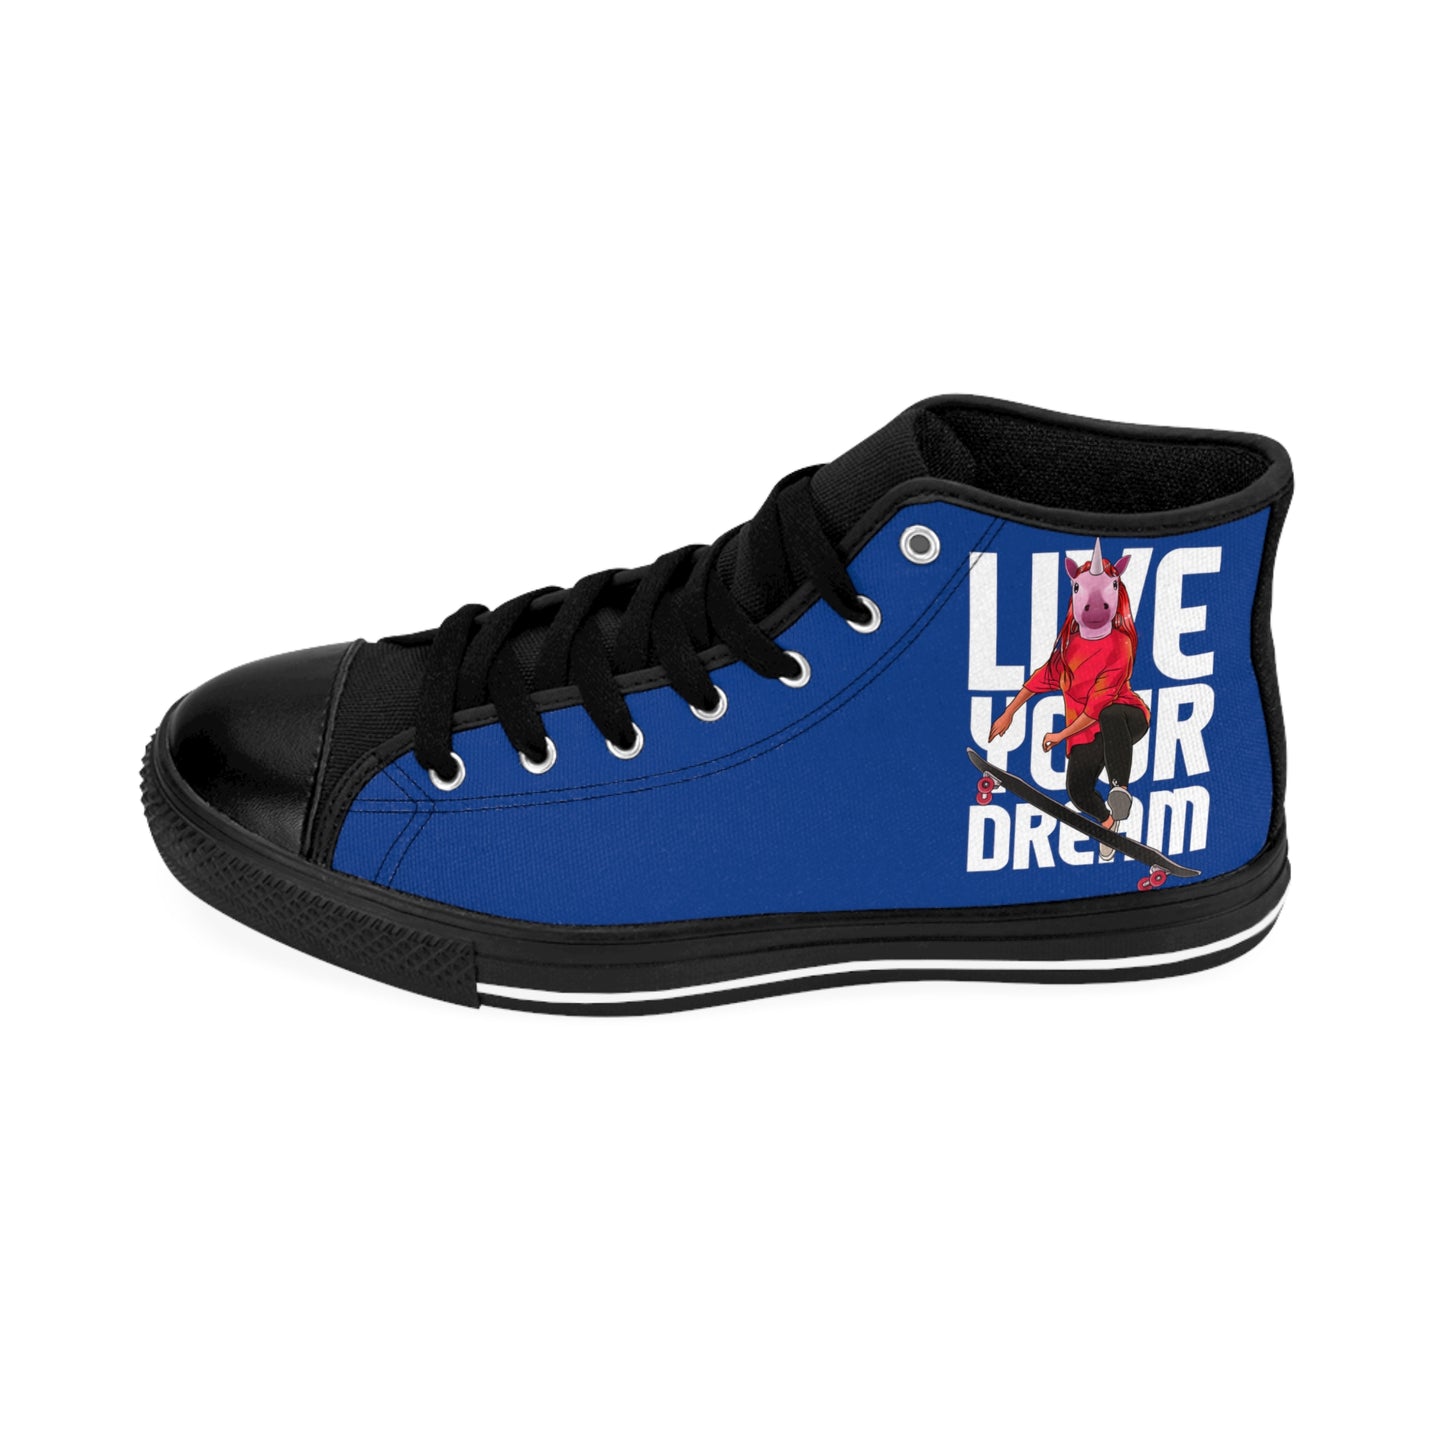 True Blue Live Your Dream High-top Sneakers